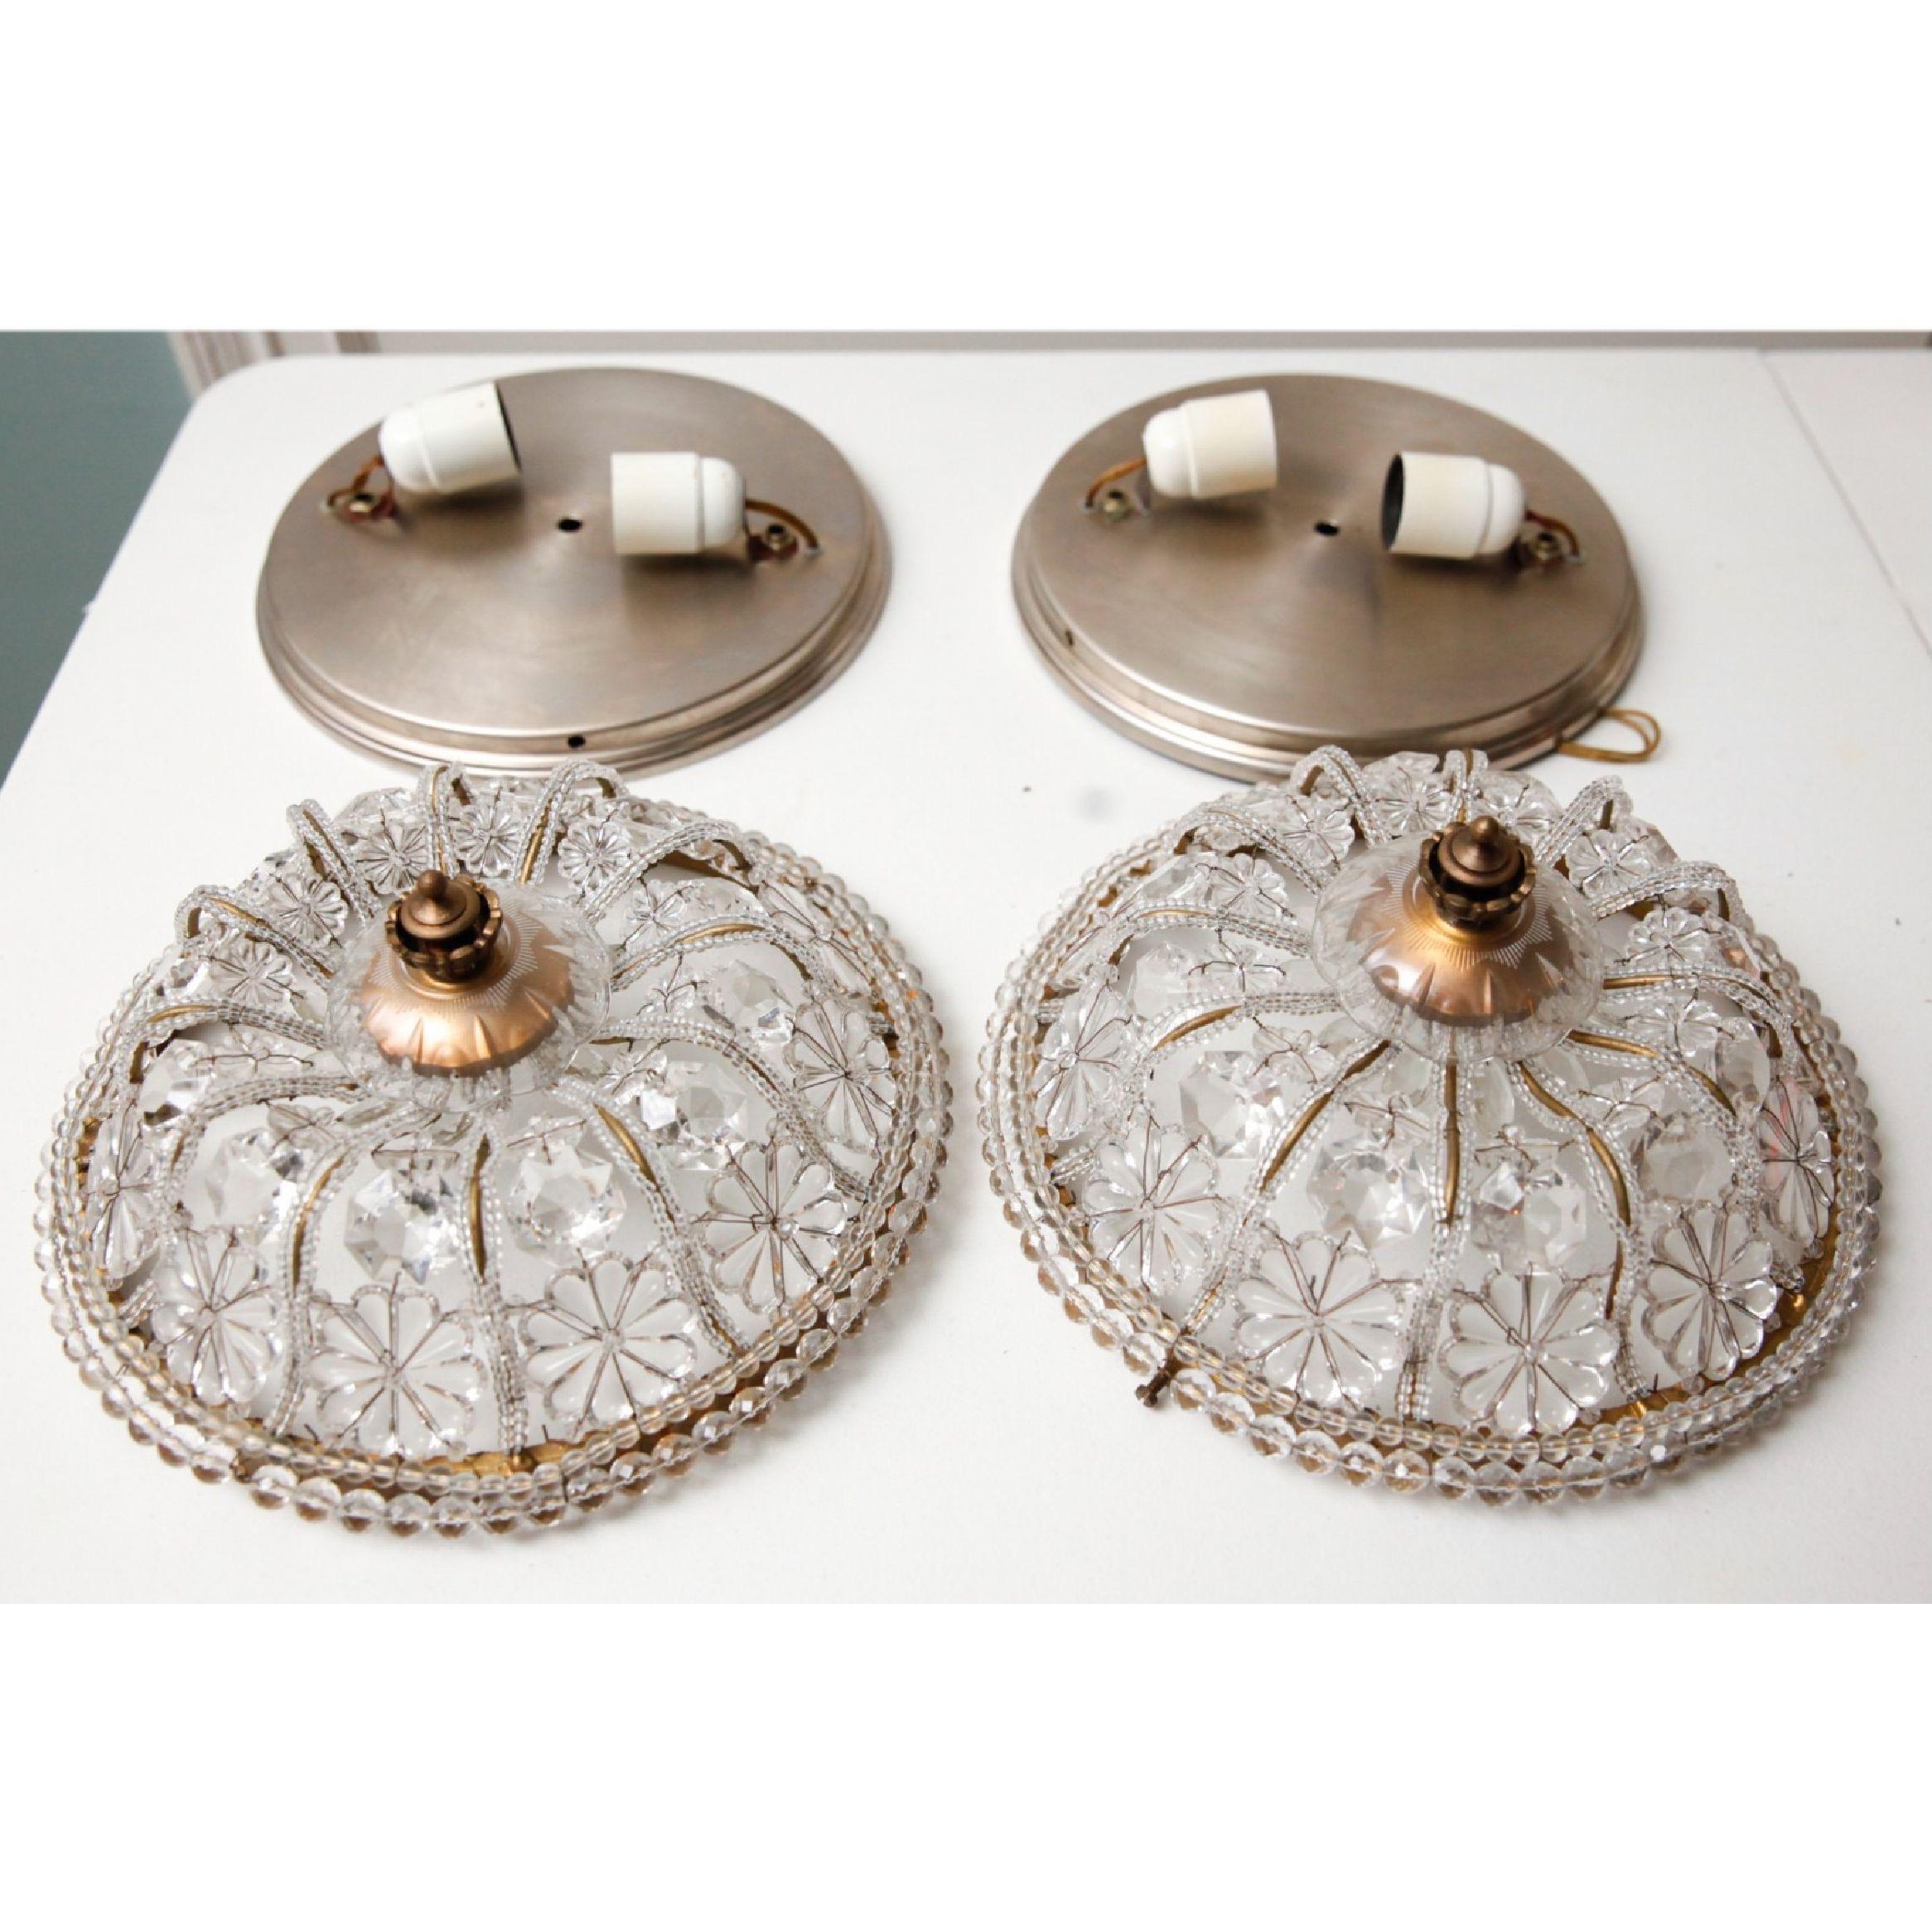 Sherle Wagner natural crystal beaded Empire flush light fixture, flush mount. Gorgeous hand-beaded piece, graceful collection of floral and faceted natural crystals on Florentine silver finish base with bronze wire.